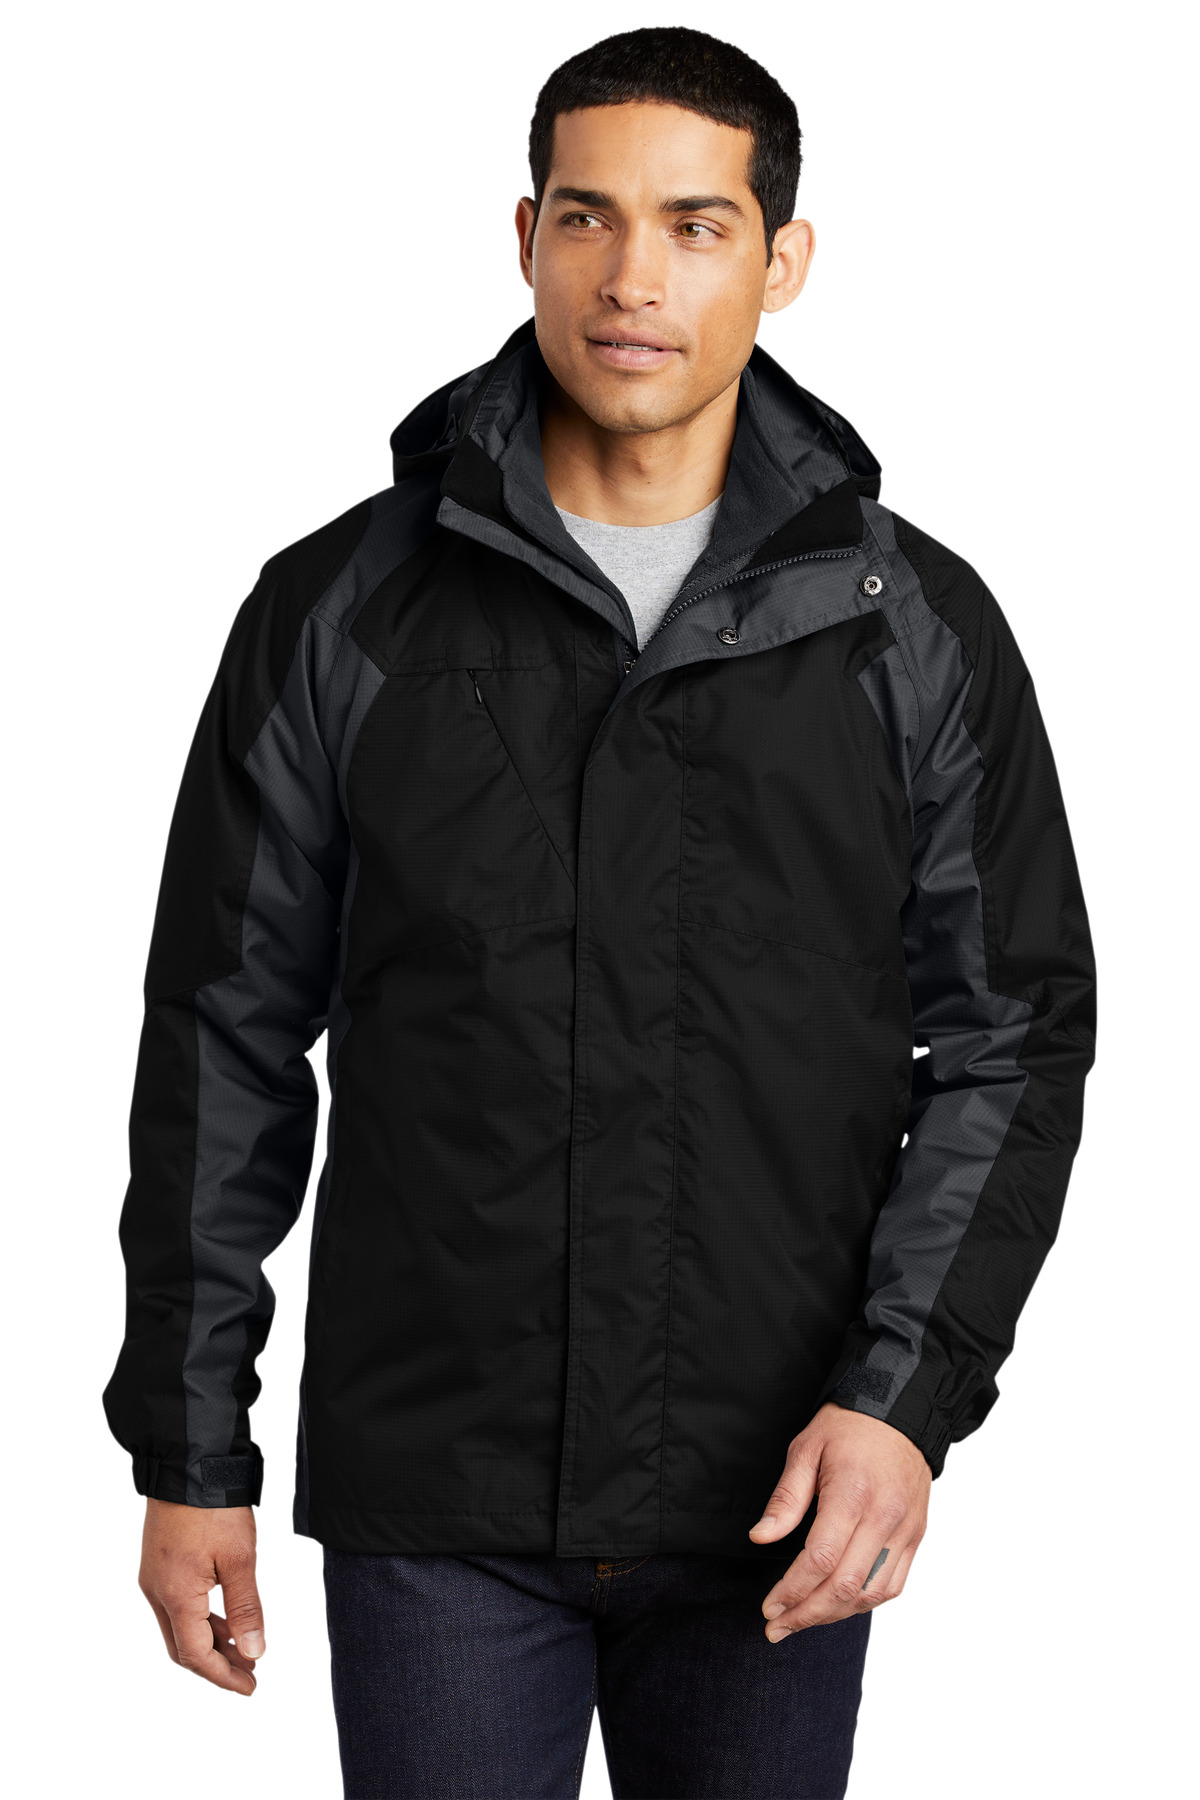 Port Authority Hospitality Outerwear ® Ranger 3-in-1 Jacket.-Port Authority